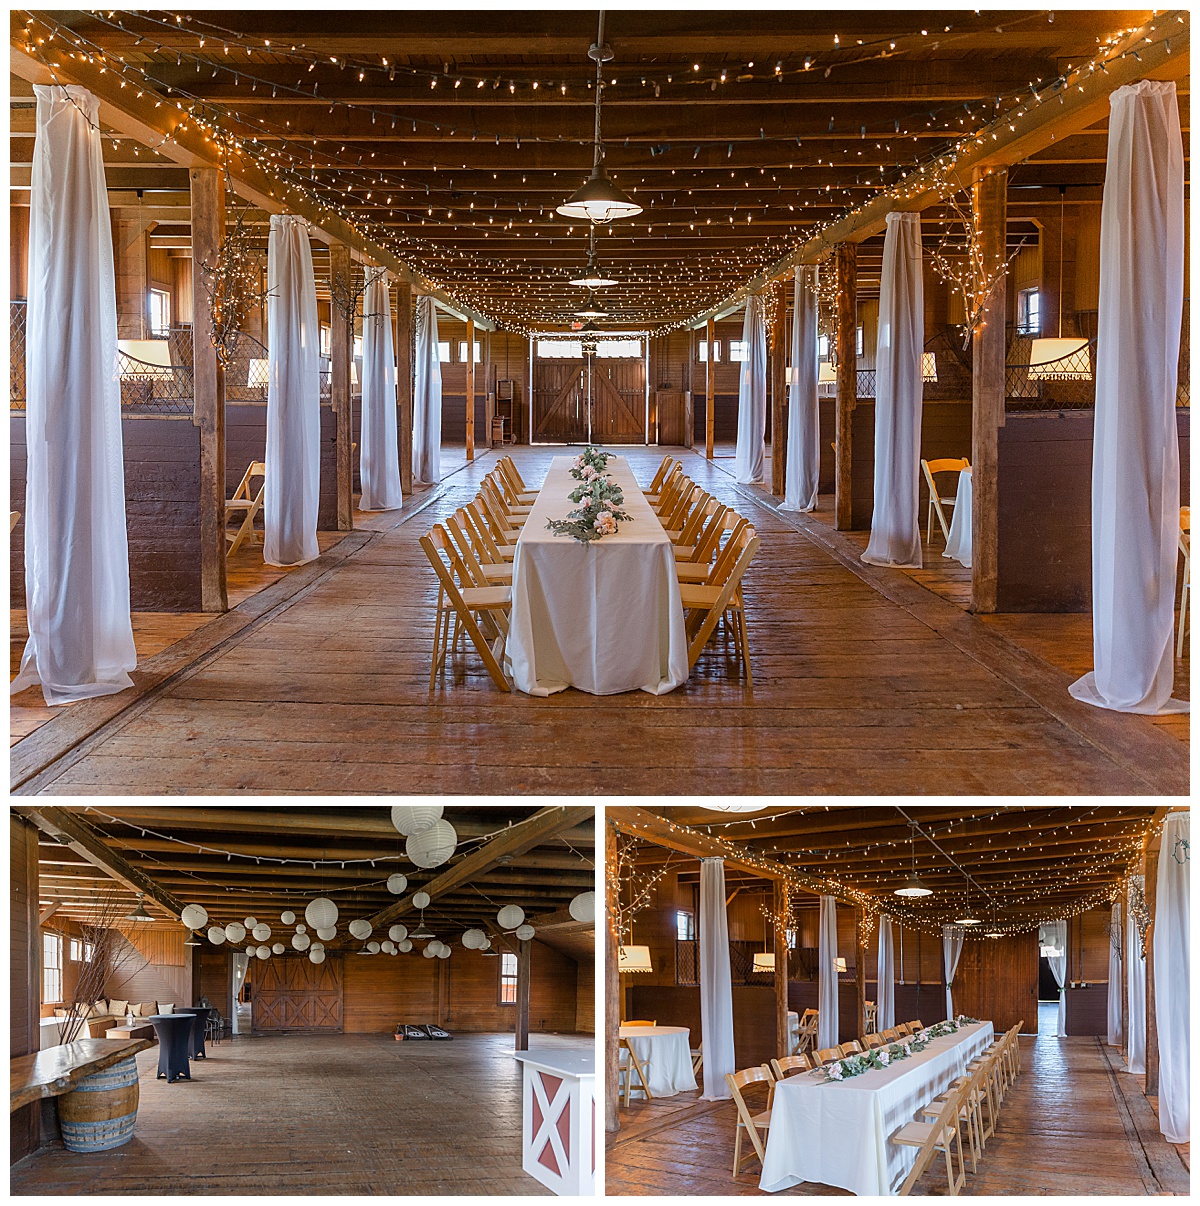 The reception space inside the restored barn at the Inn at Mountain View Farm in East Burke, Vermont offers a rustic charm to wedding celebrations.